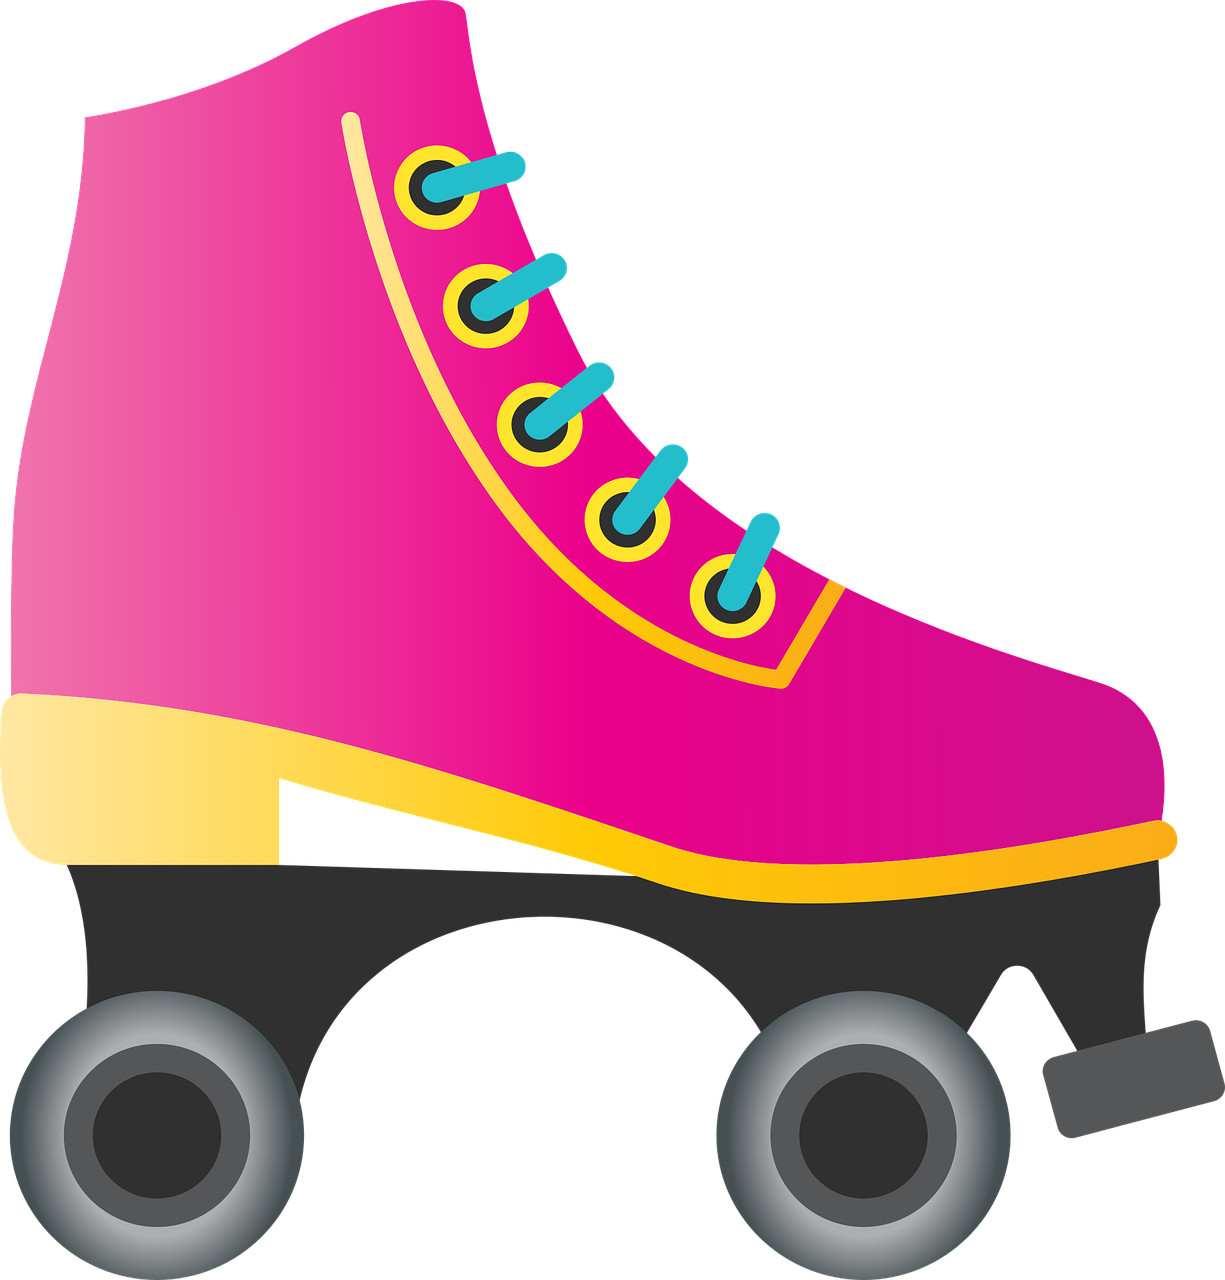 a roller skate shoe with wheels on a black background, pixabay, pink scheme, pink and yellow, smooth illustration, cutout